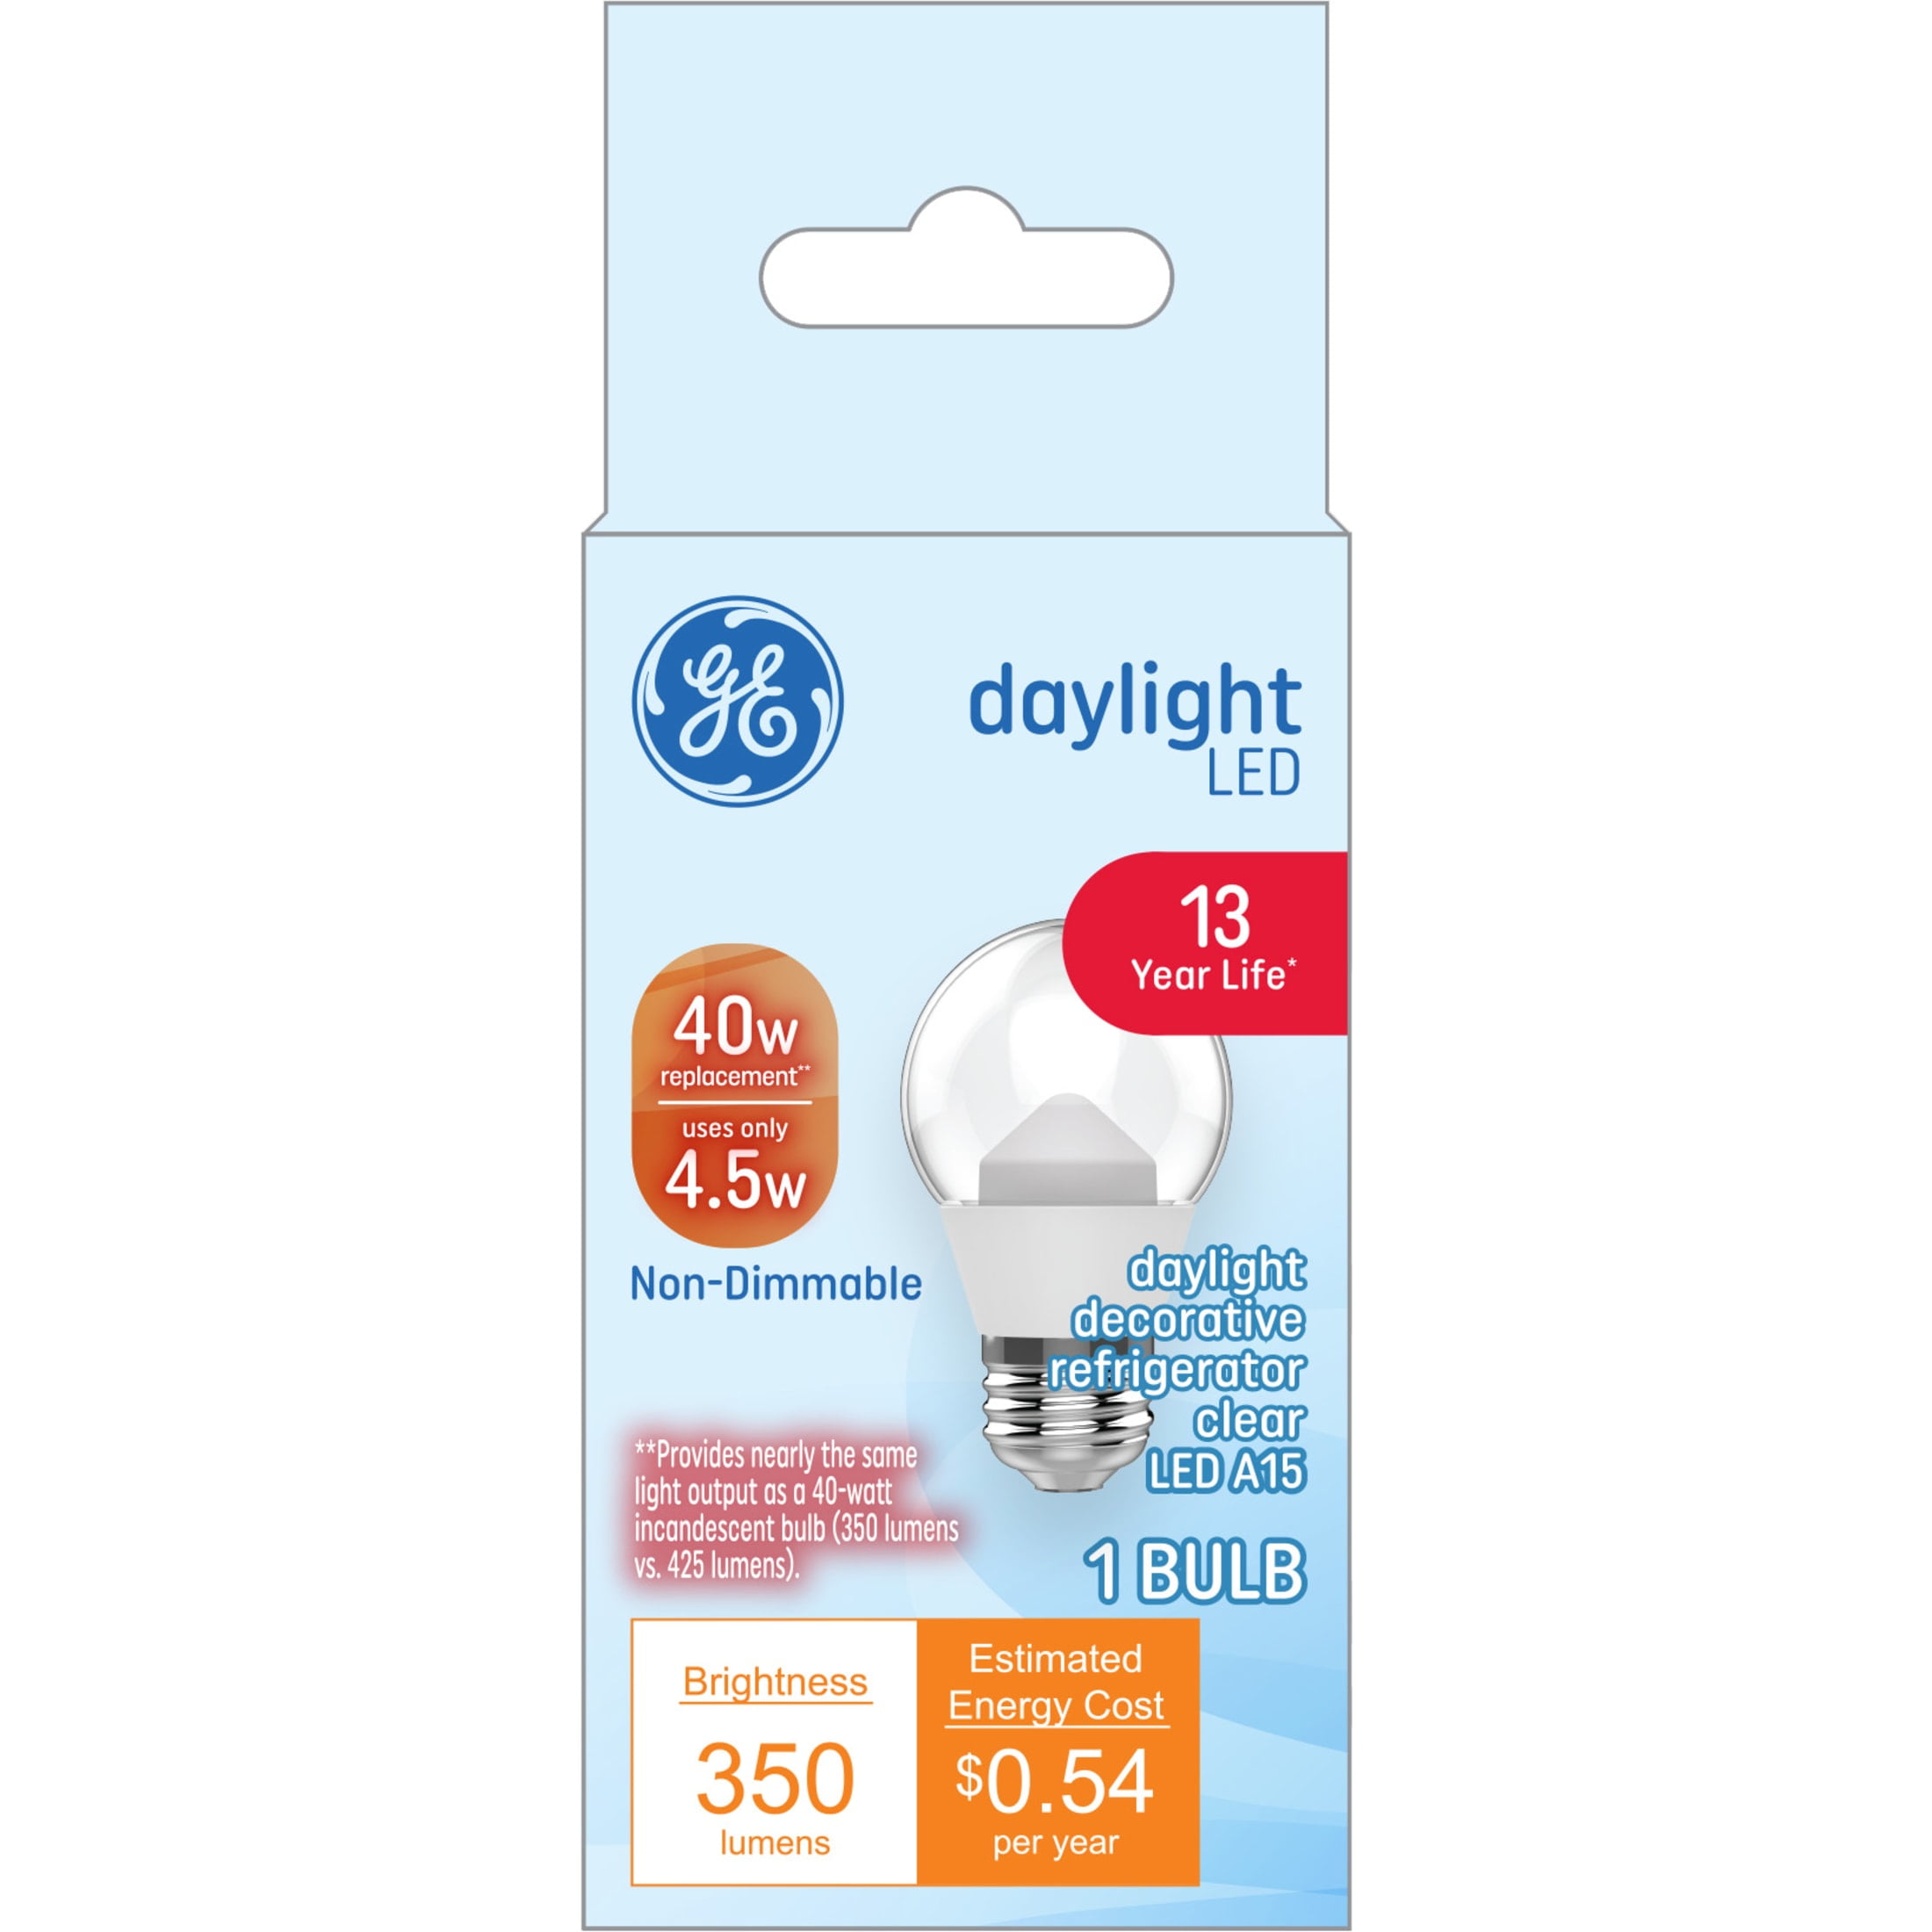 GE Specialty LED 40-Watt EQ T8 Soft White Intermediate Base (E-17) LED  Light Bulb in the Specialty Light Bulbs department at